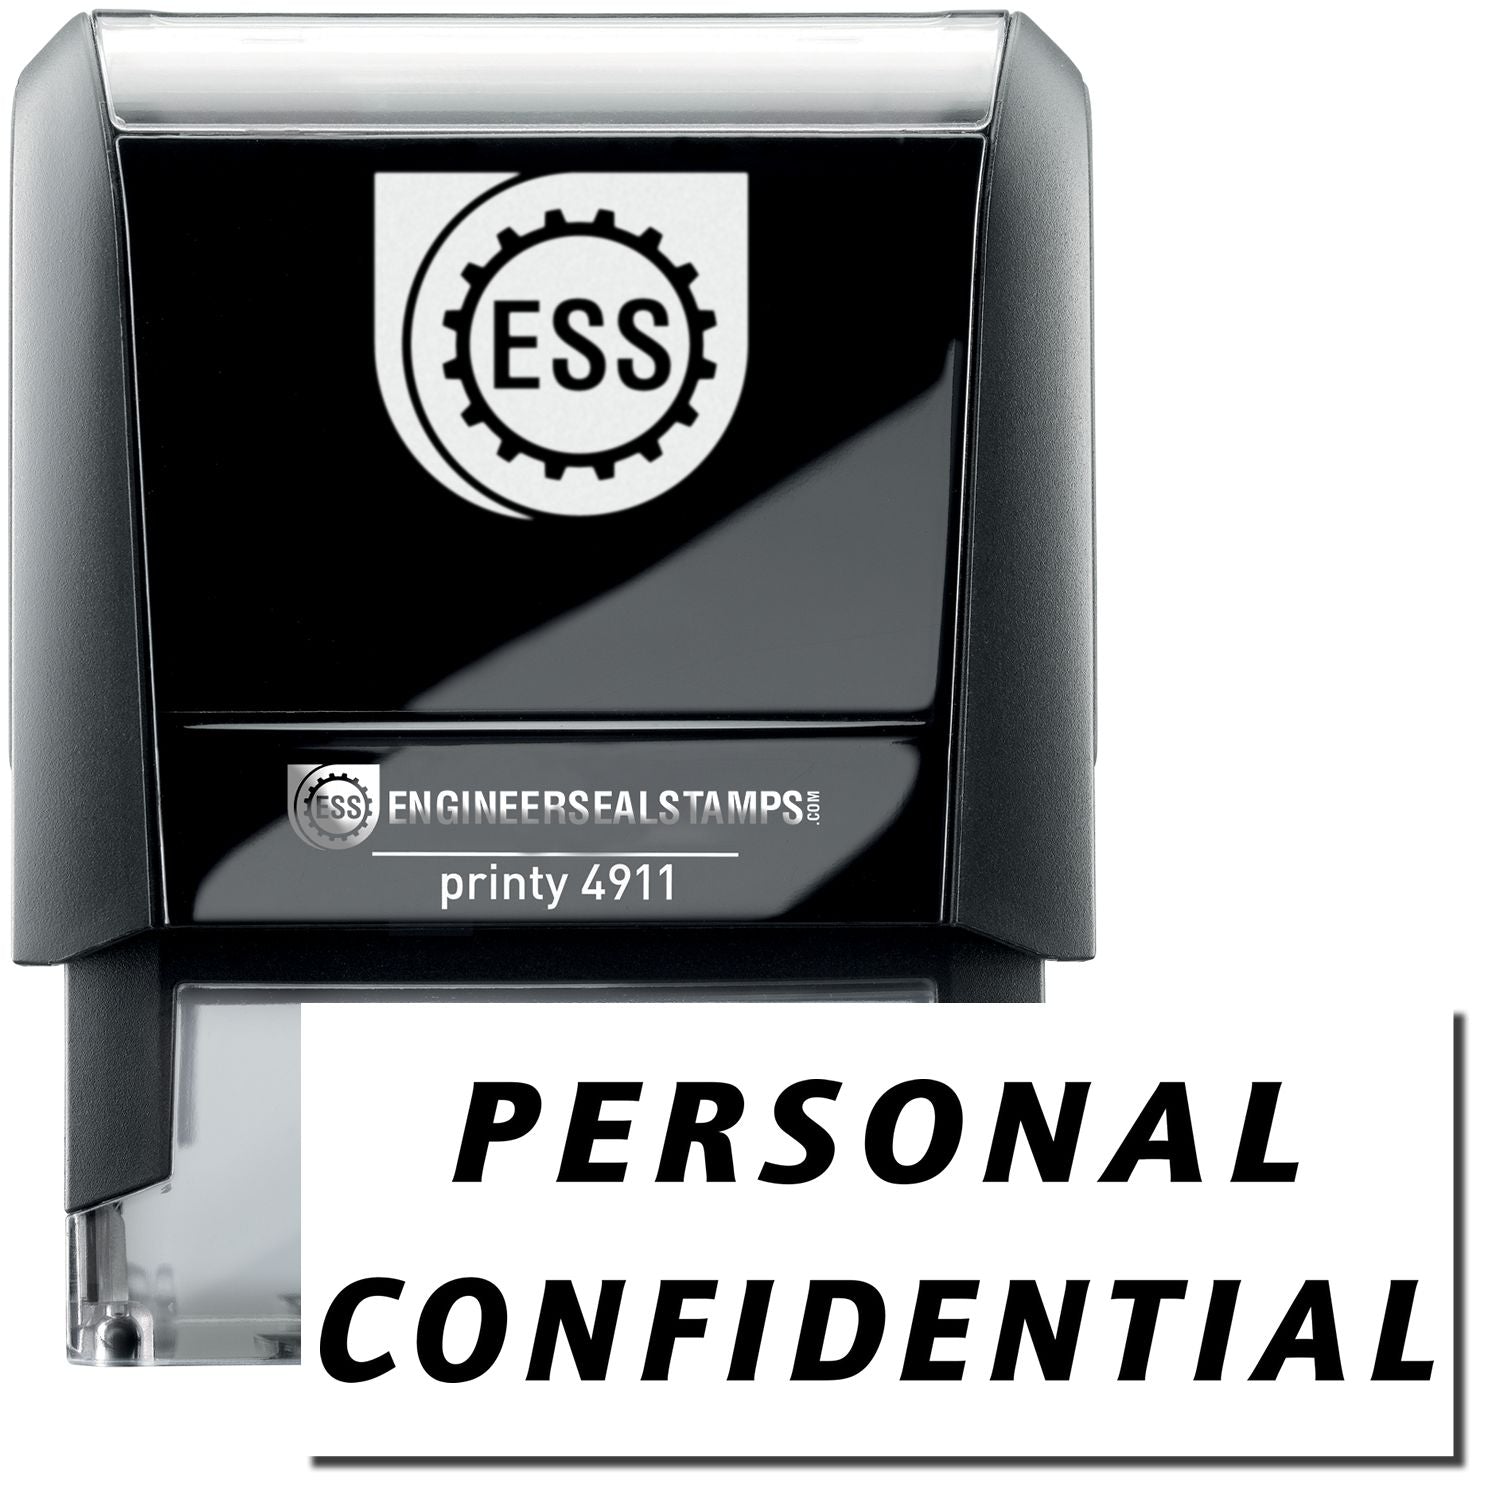 A self-inking stamp with a stamped image showing how the text "PERSONAL CONFIDENTIAL" in italic font is displayed after stamping.